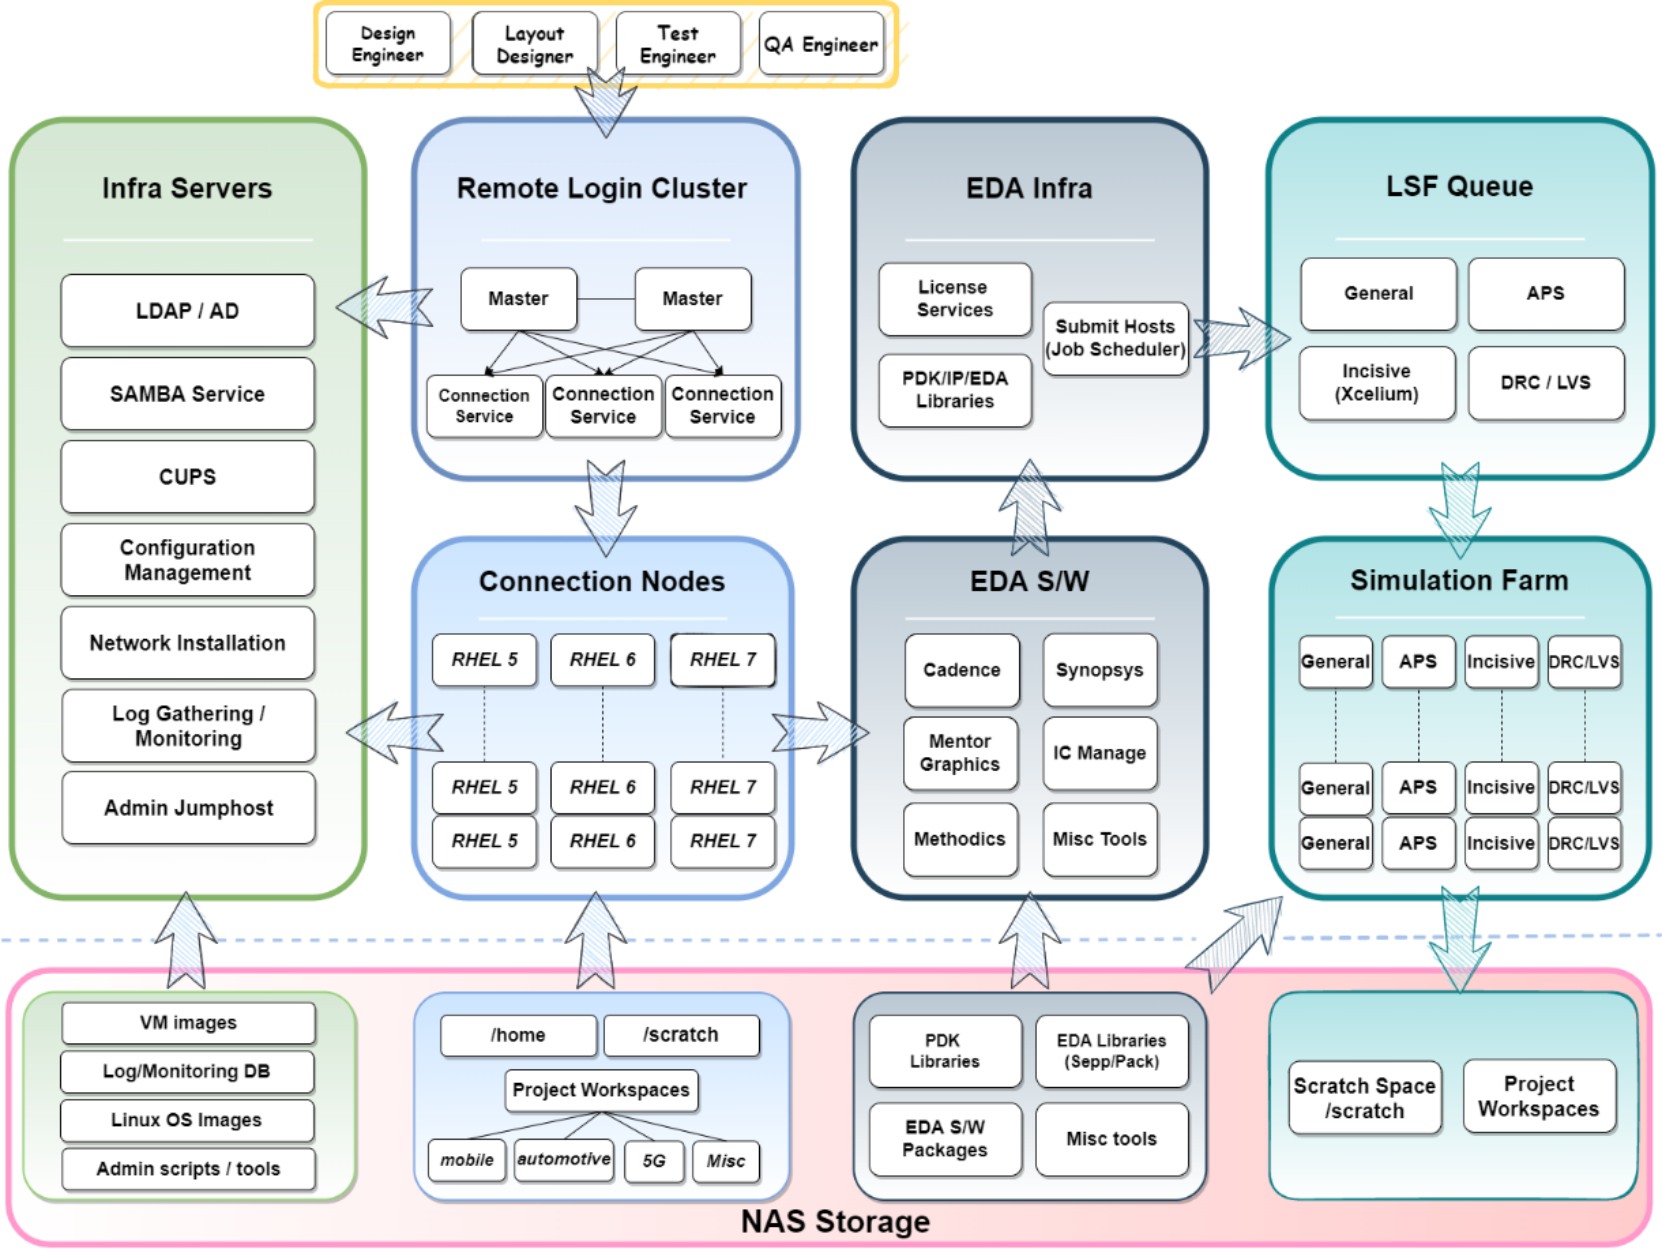 Which components are used in general EDA engineering IT architecture.